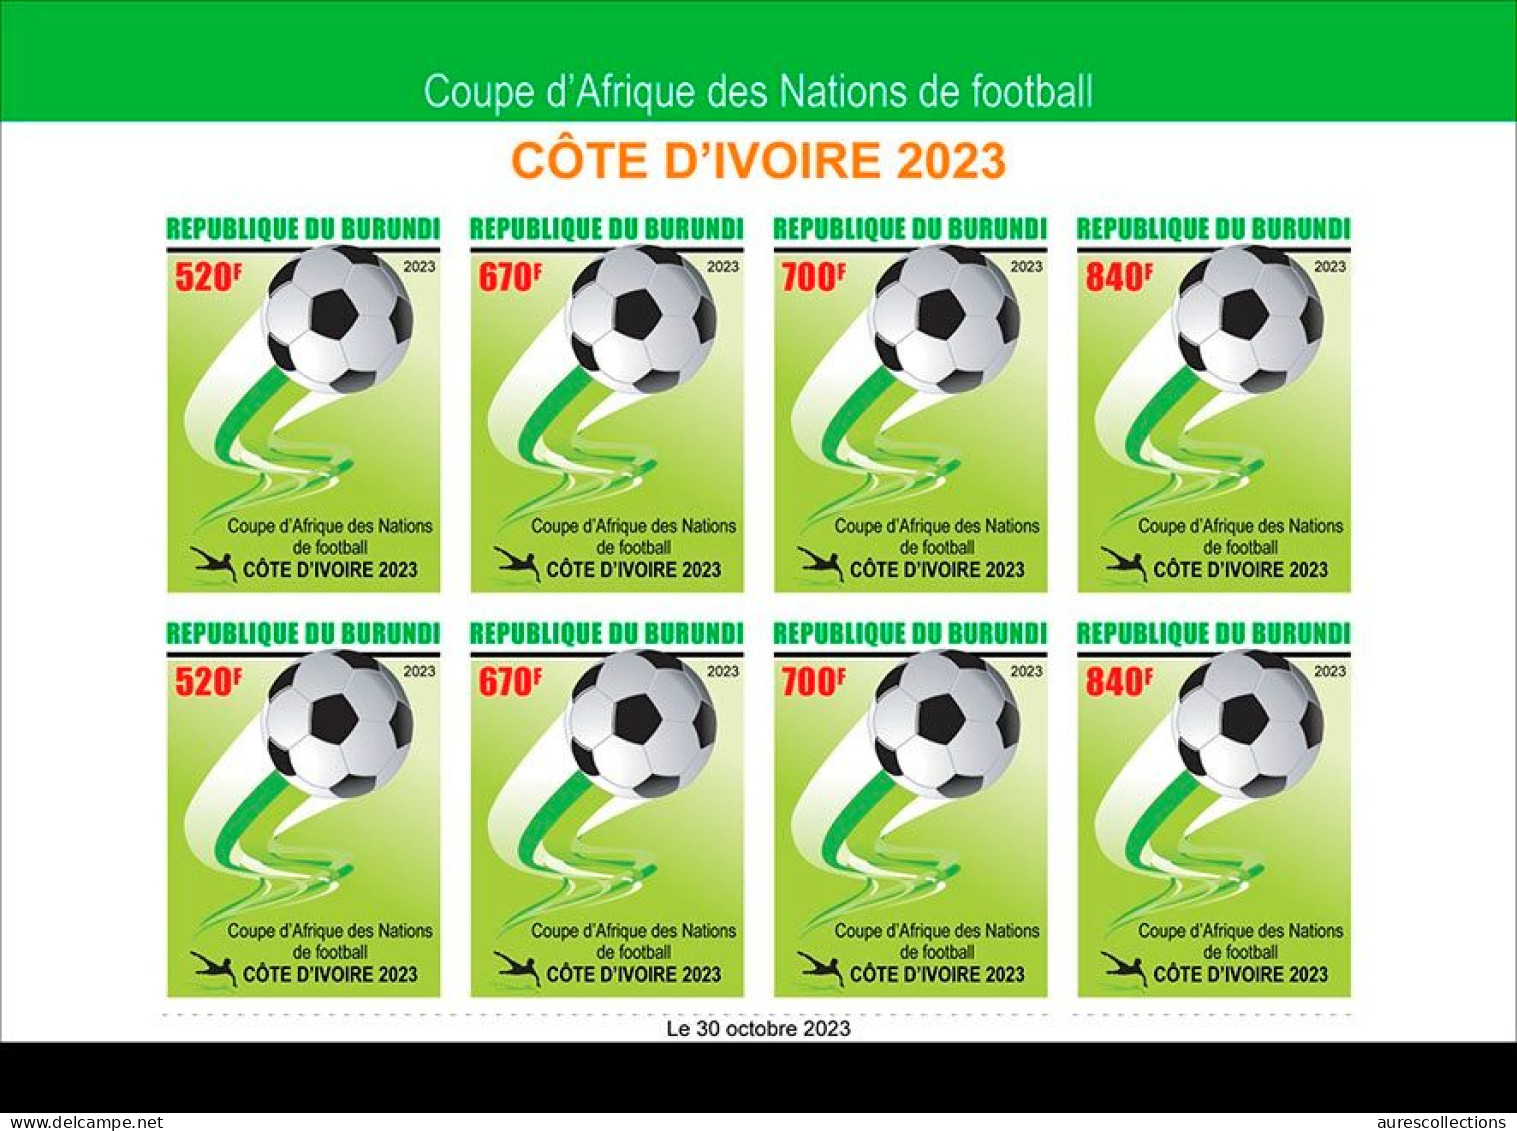 BURUNDI 2023 AUTHENTIC IMPERF SHEET 8V - FOOTBALL SOCCER AFRICA CUP OF NATIONS IVORY COAST COTE D' IVOIRE - MNH - Afrika Cup